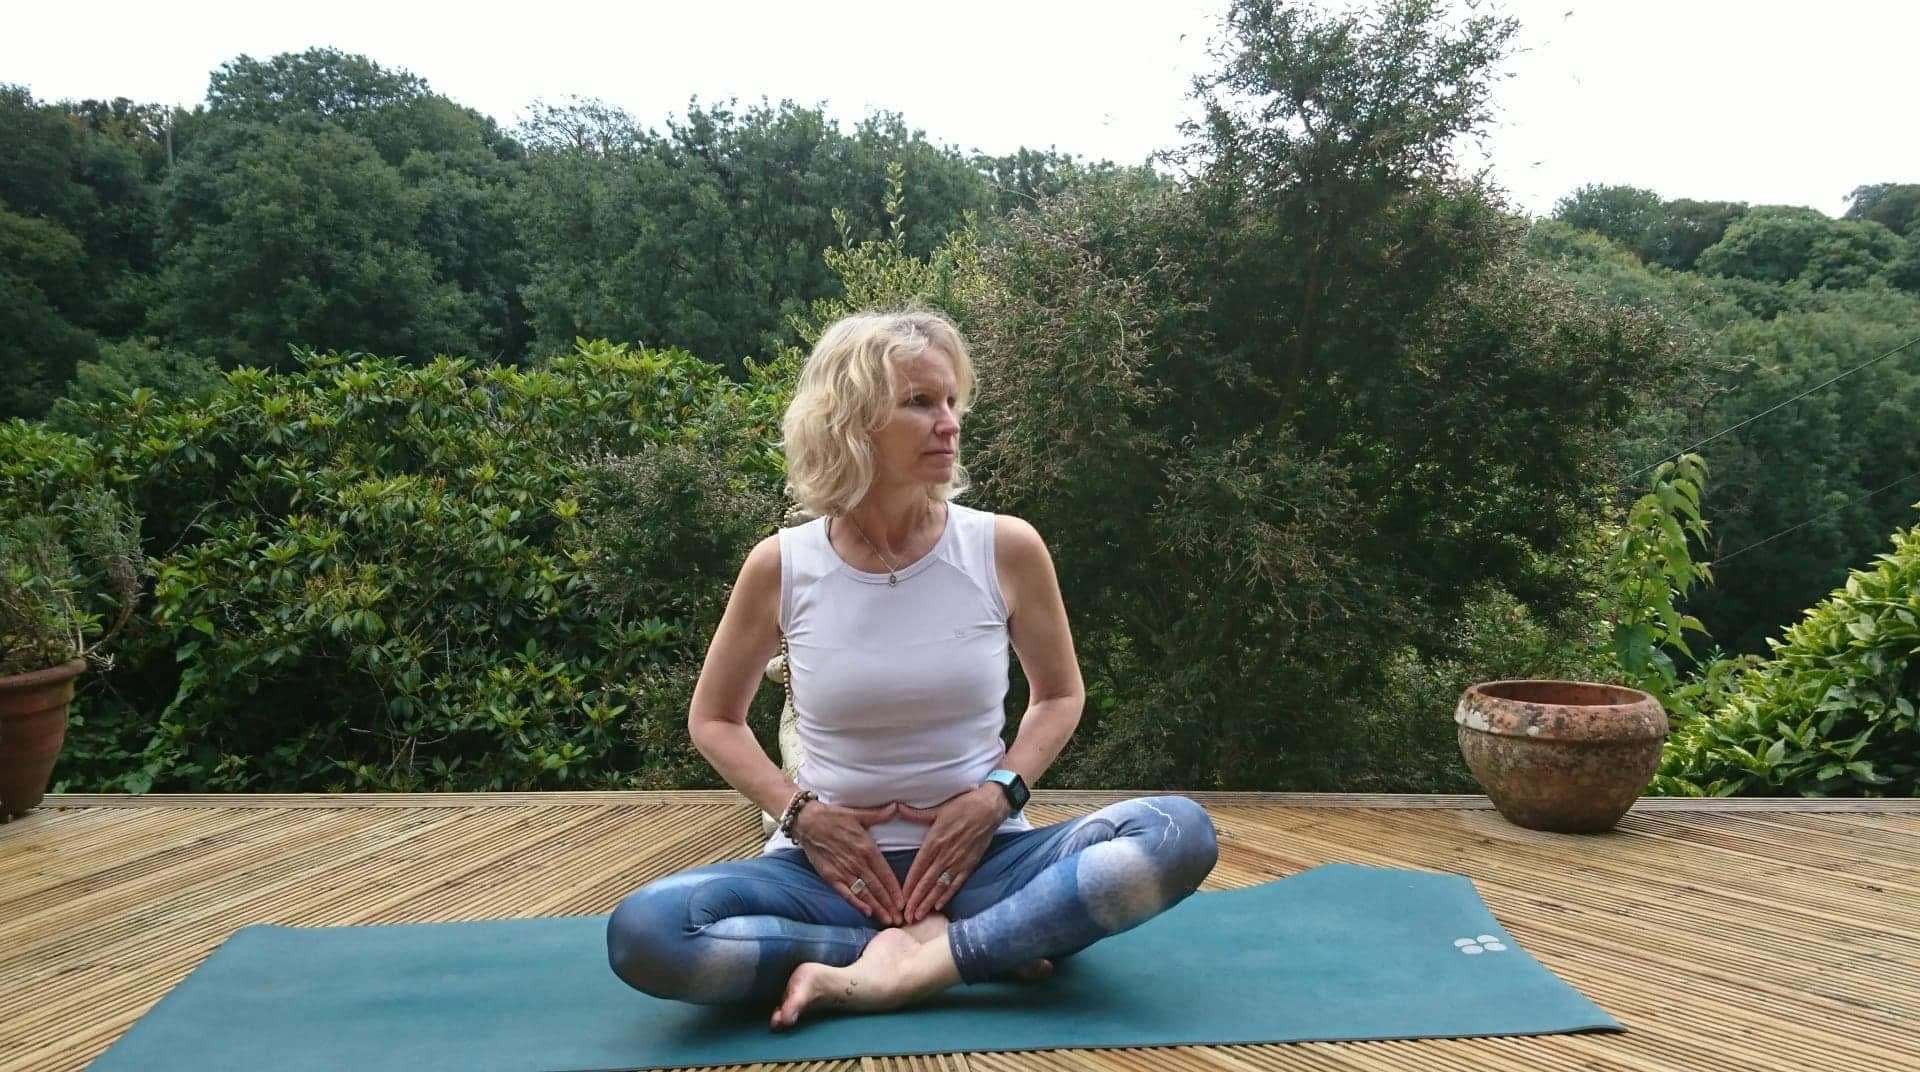 The old woman sitting in Meditation & Yin Yoga sequence for hips pose, surrounded with their background is trees